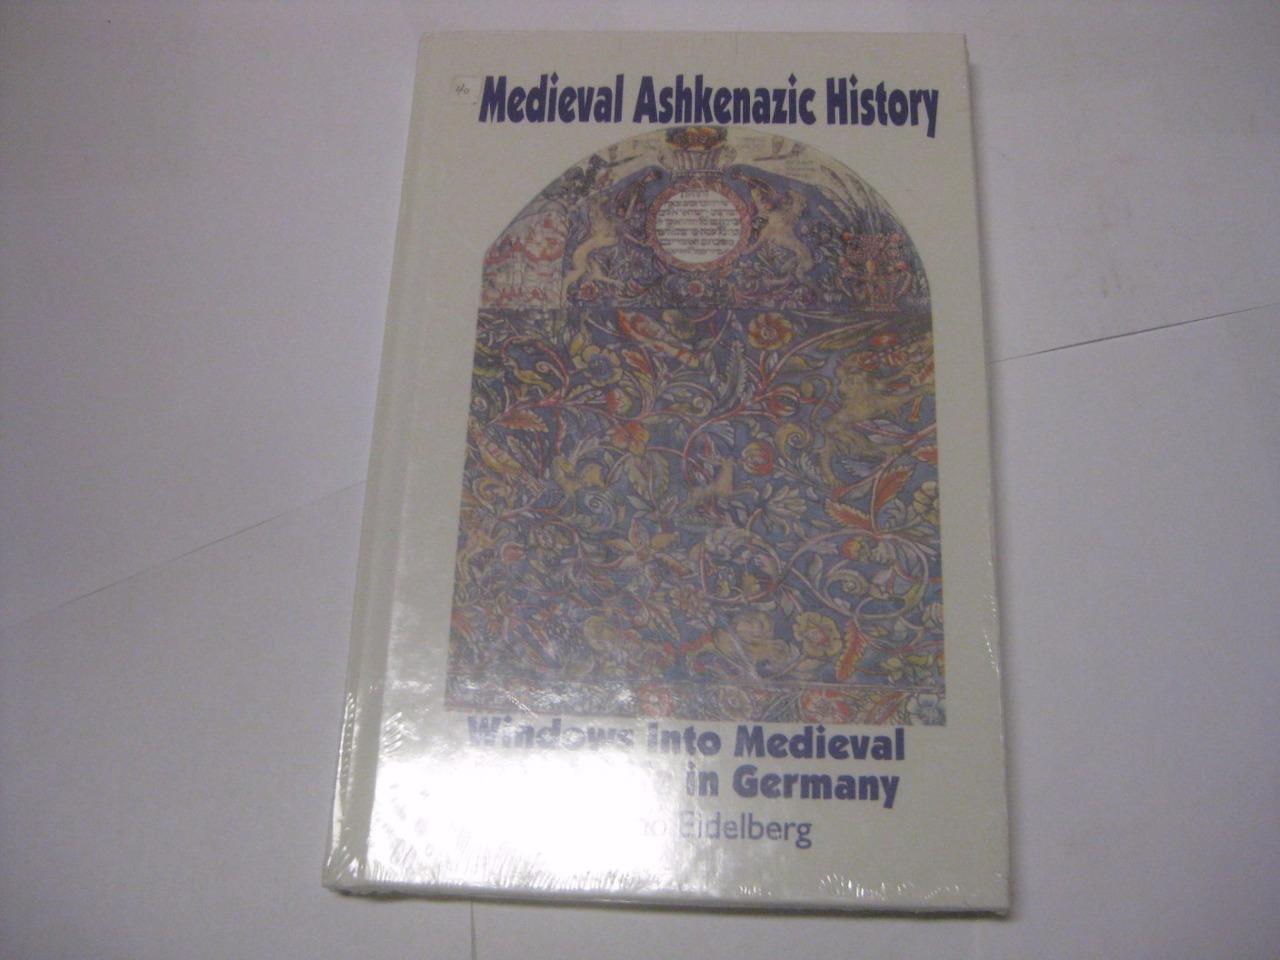 Medieval Ashkenazic History: Studies on German Jewry in the Middle Ages